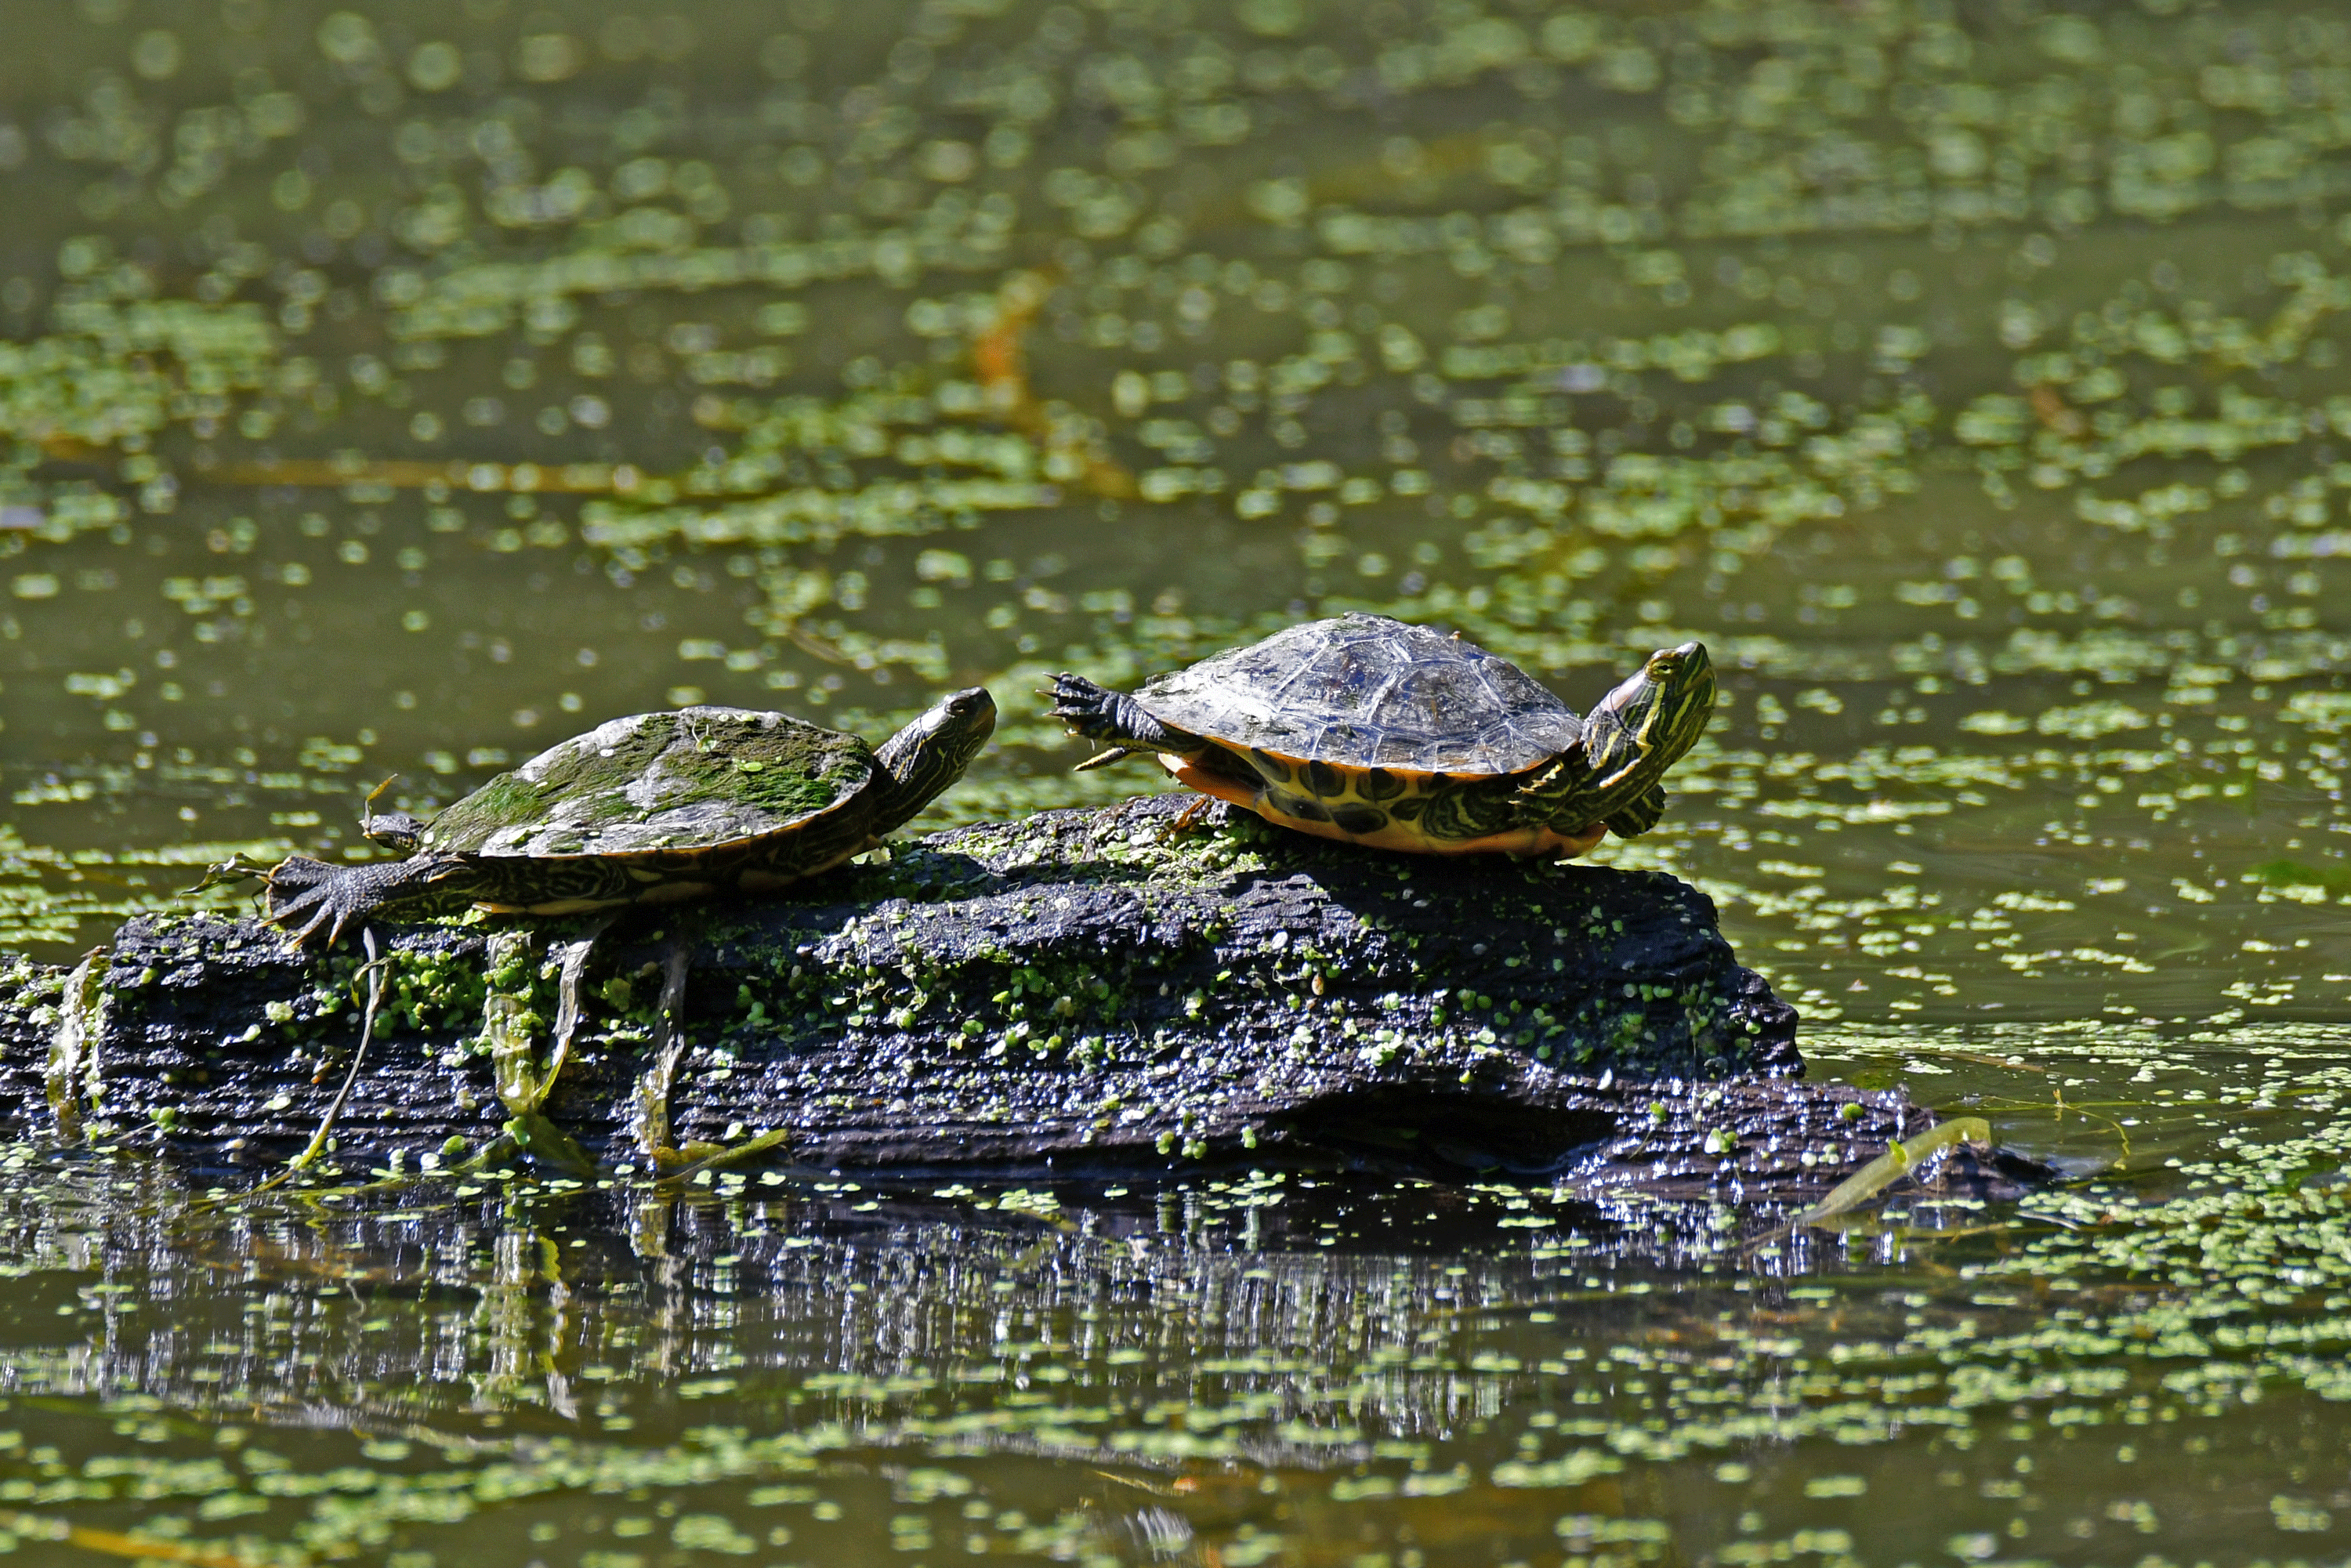 Two turtles sunbathing on a rock in the water.